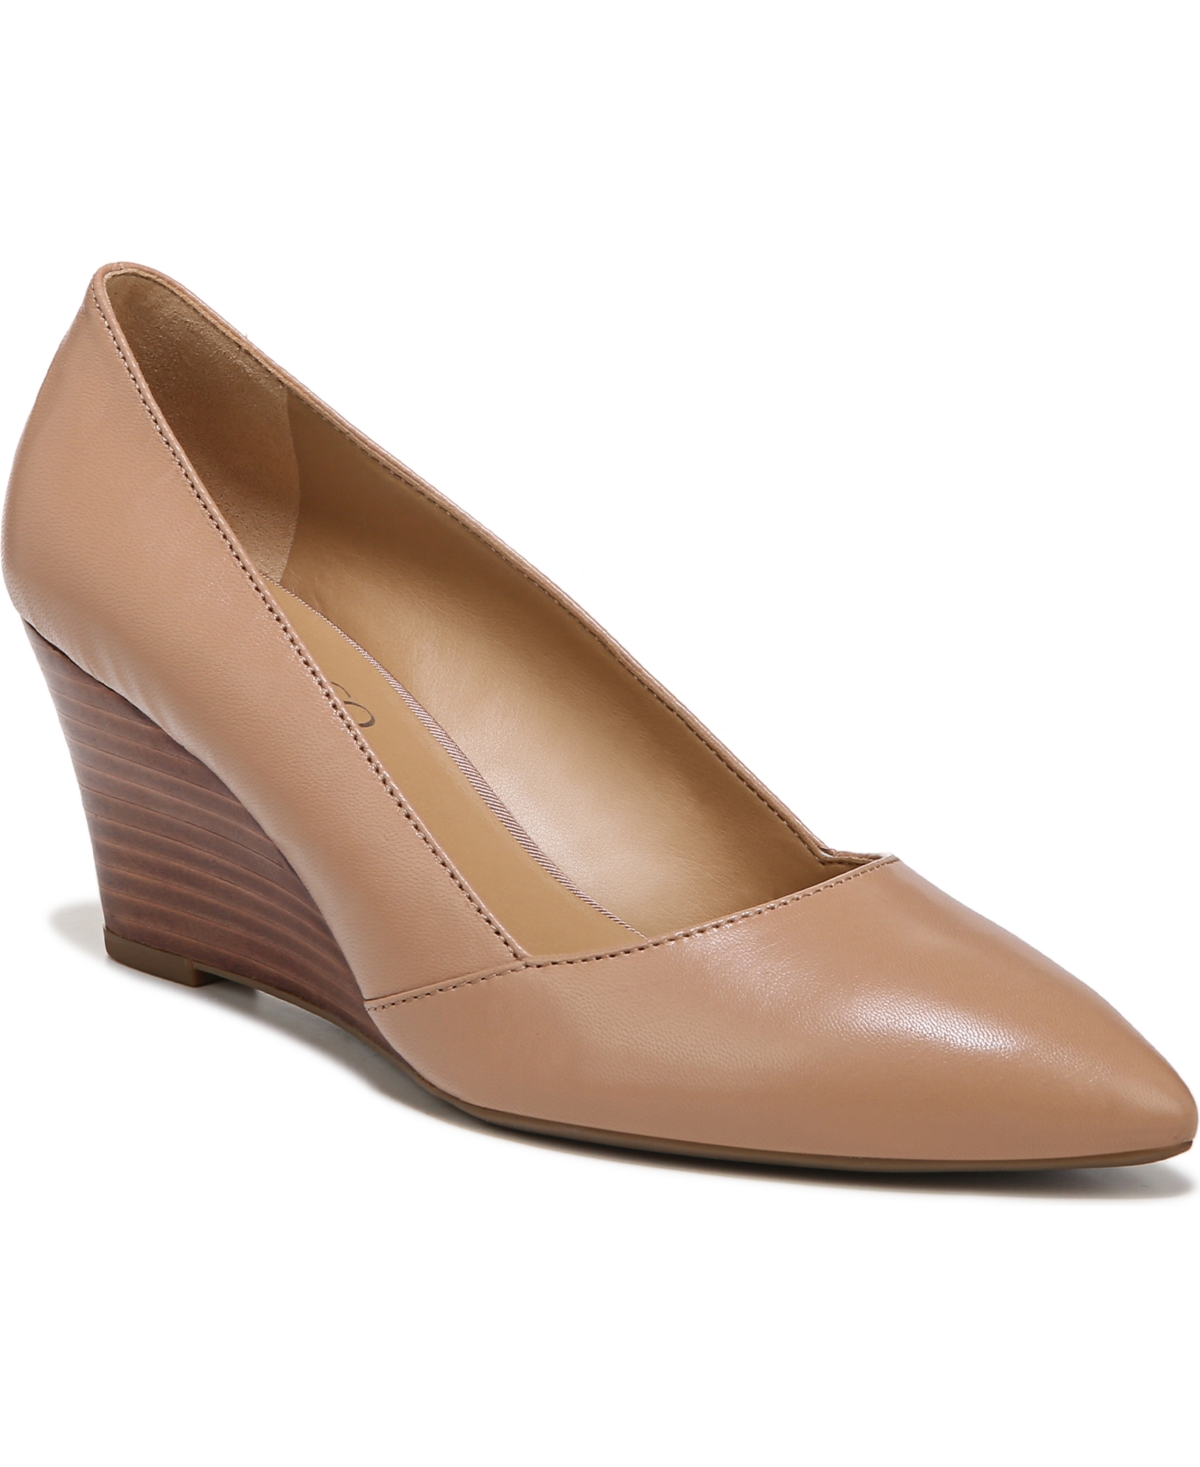 Franco Sarto Frankie Wedge Pumps In Cool Taupe Tan Leather